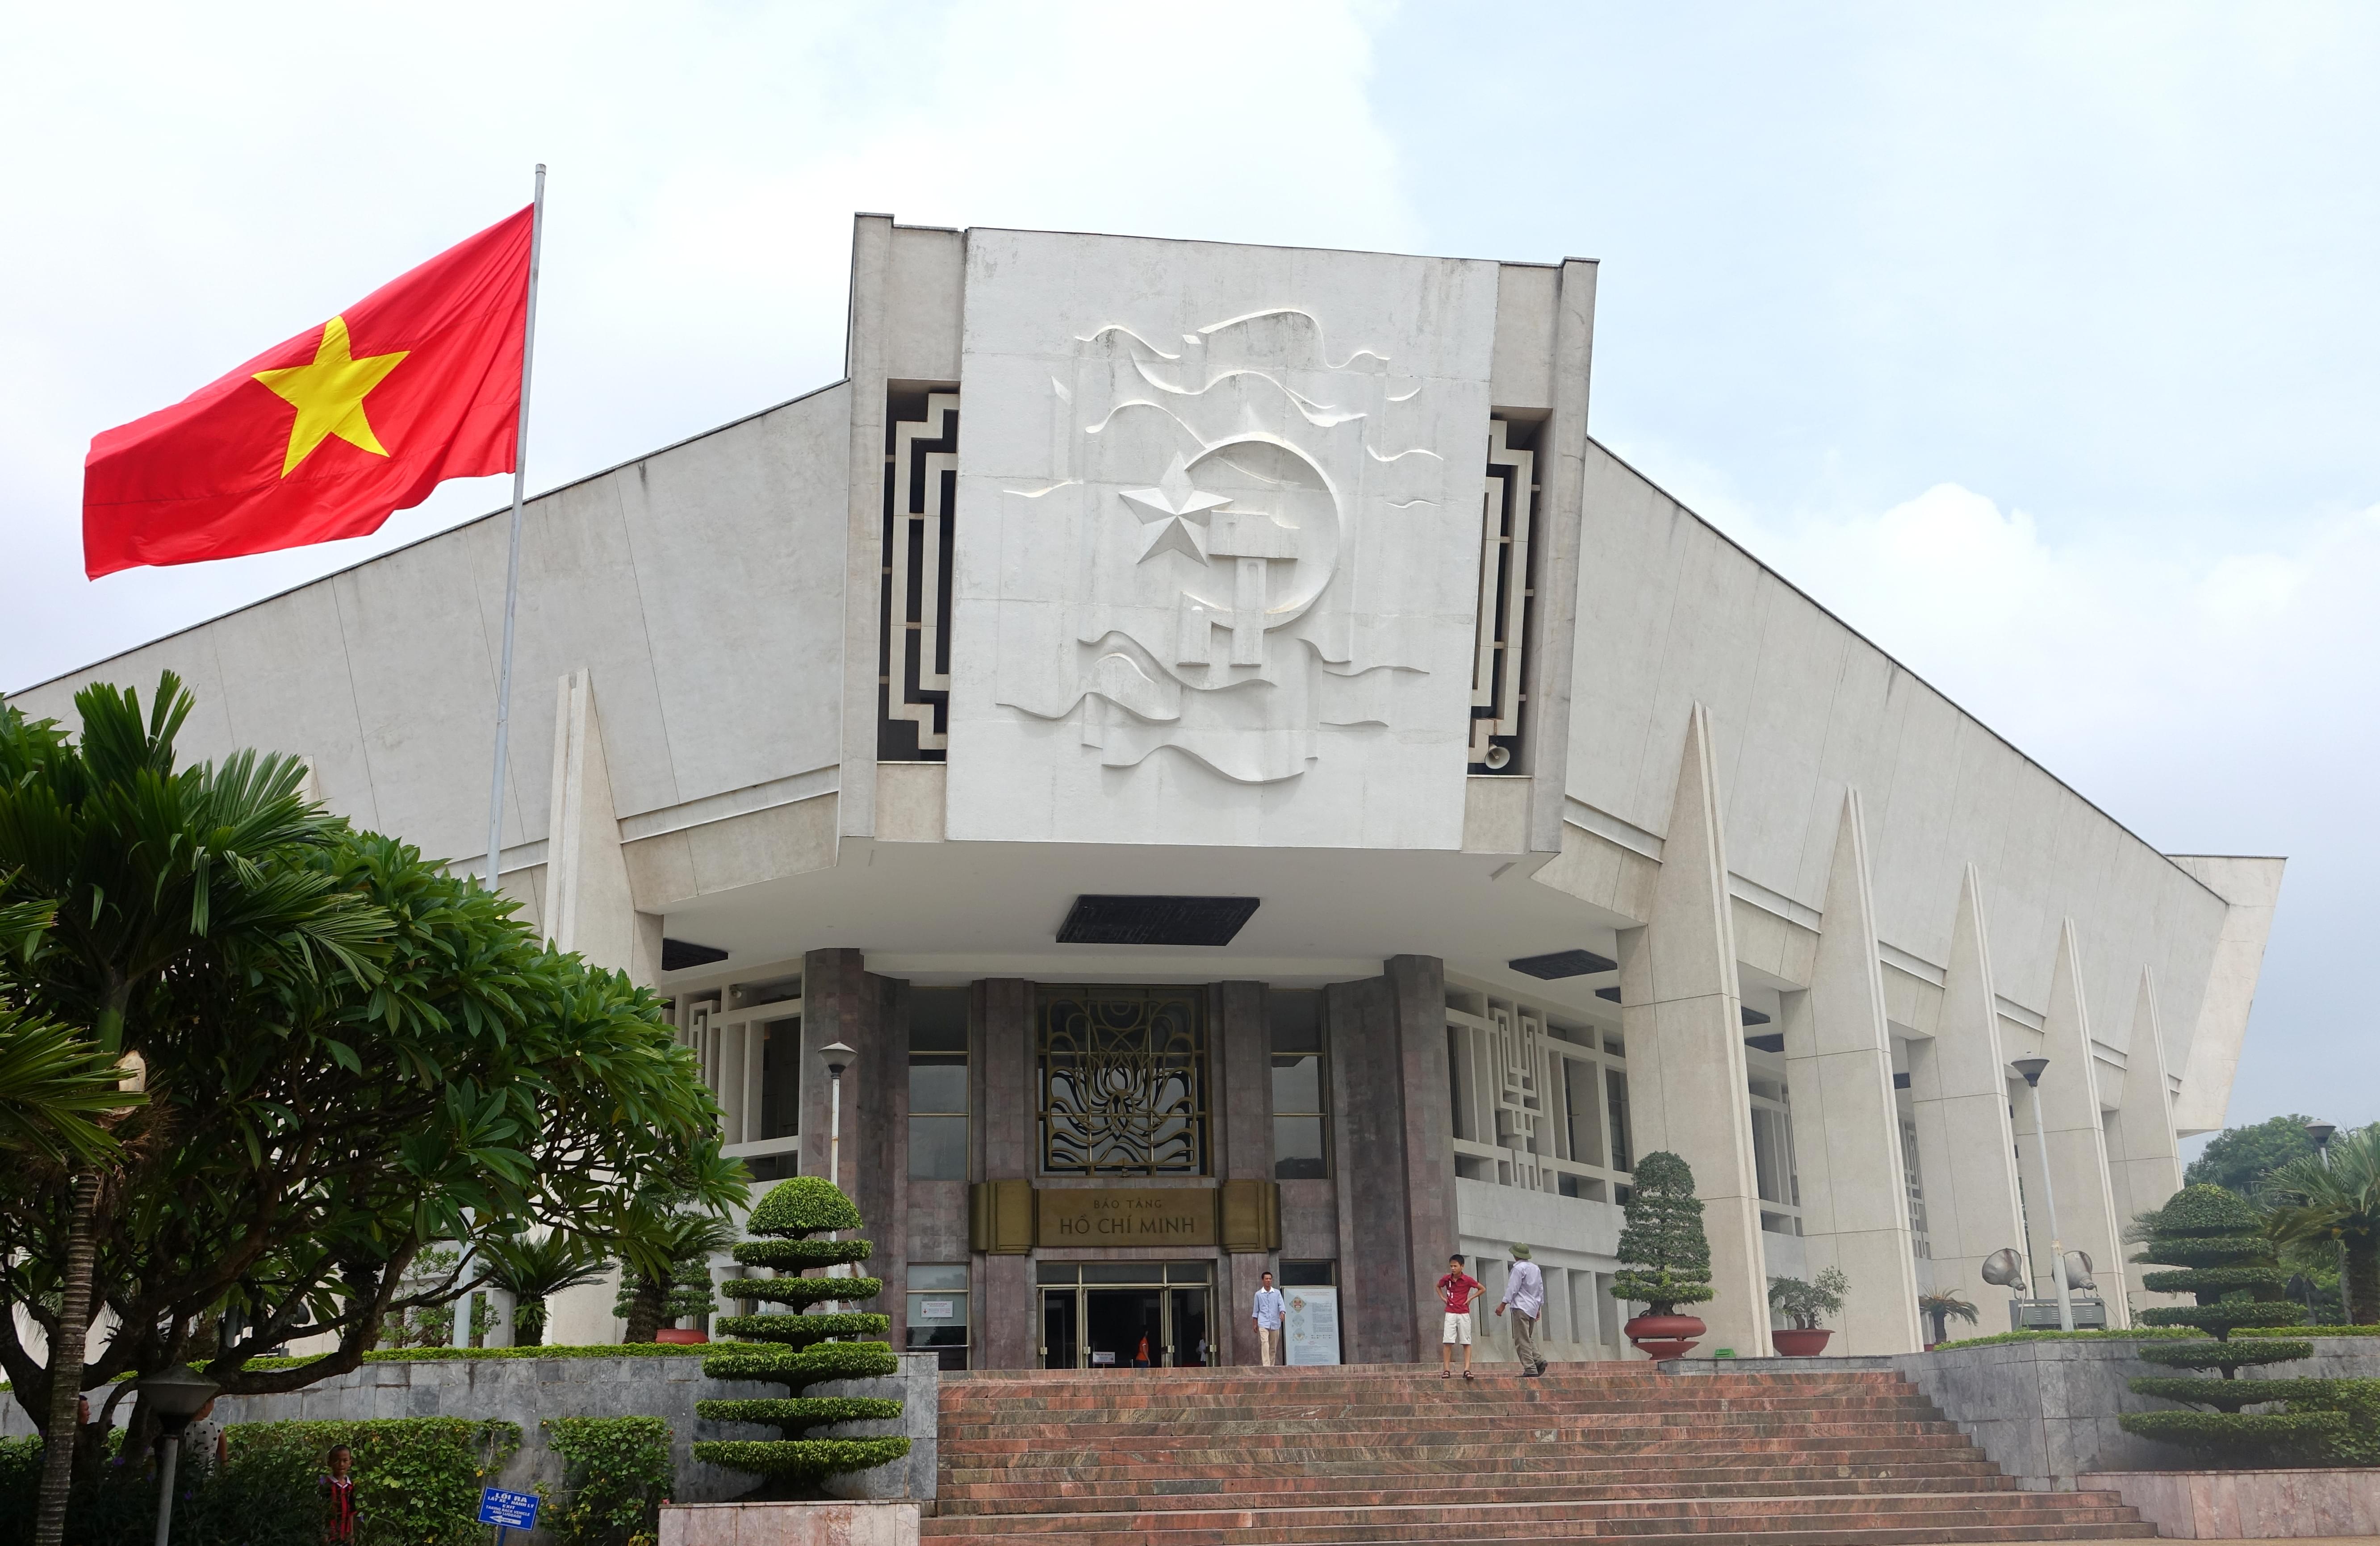 Pay a visit to the Ho Chi Minh Museum